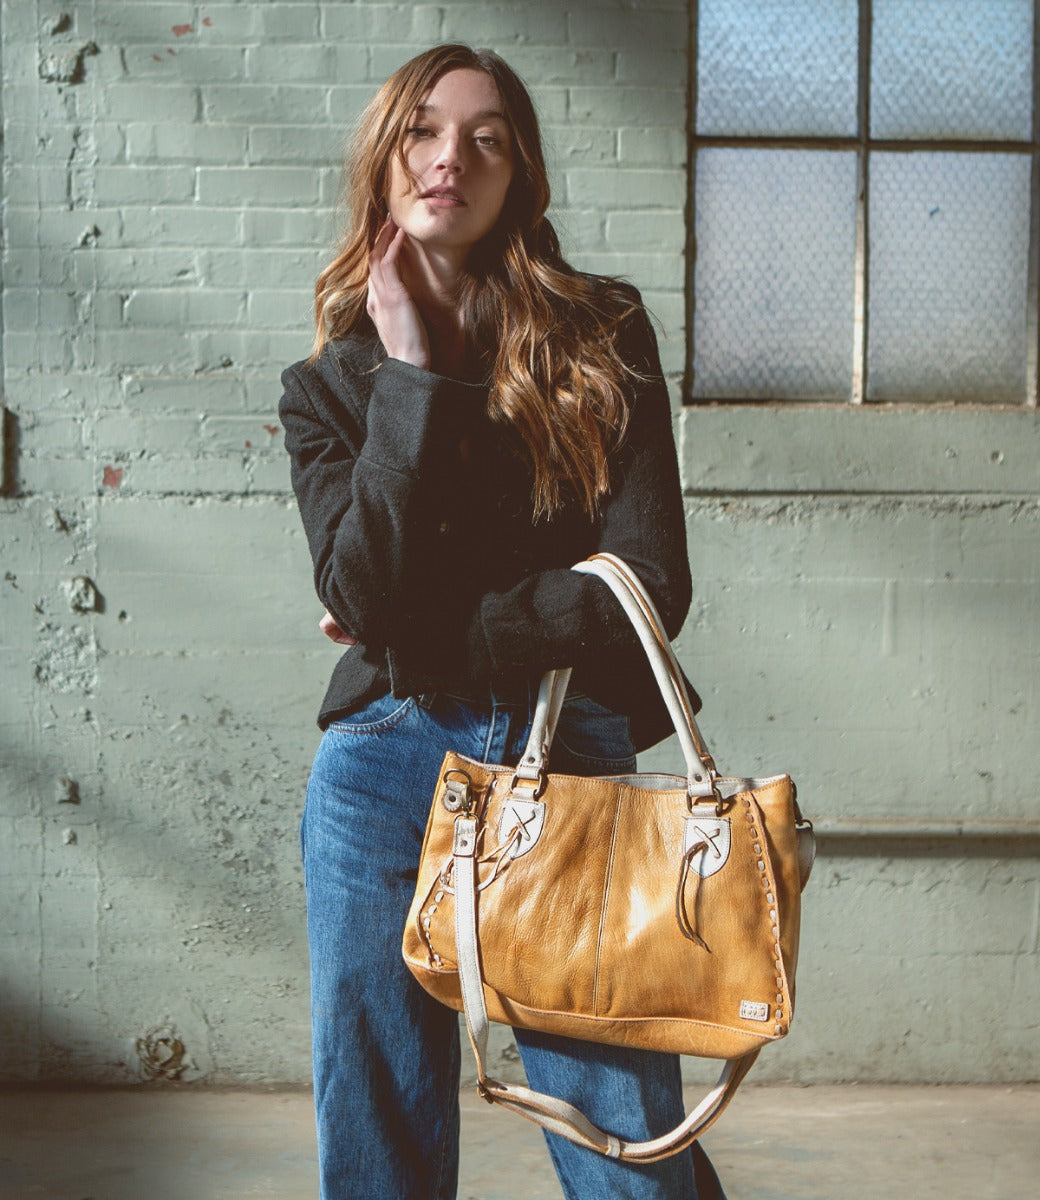 A woman wearing jeans and a Rockababy leather bag by Bed Stu.